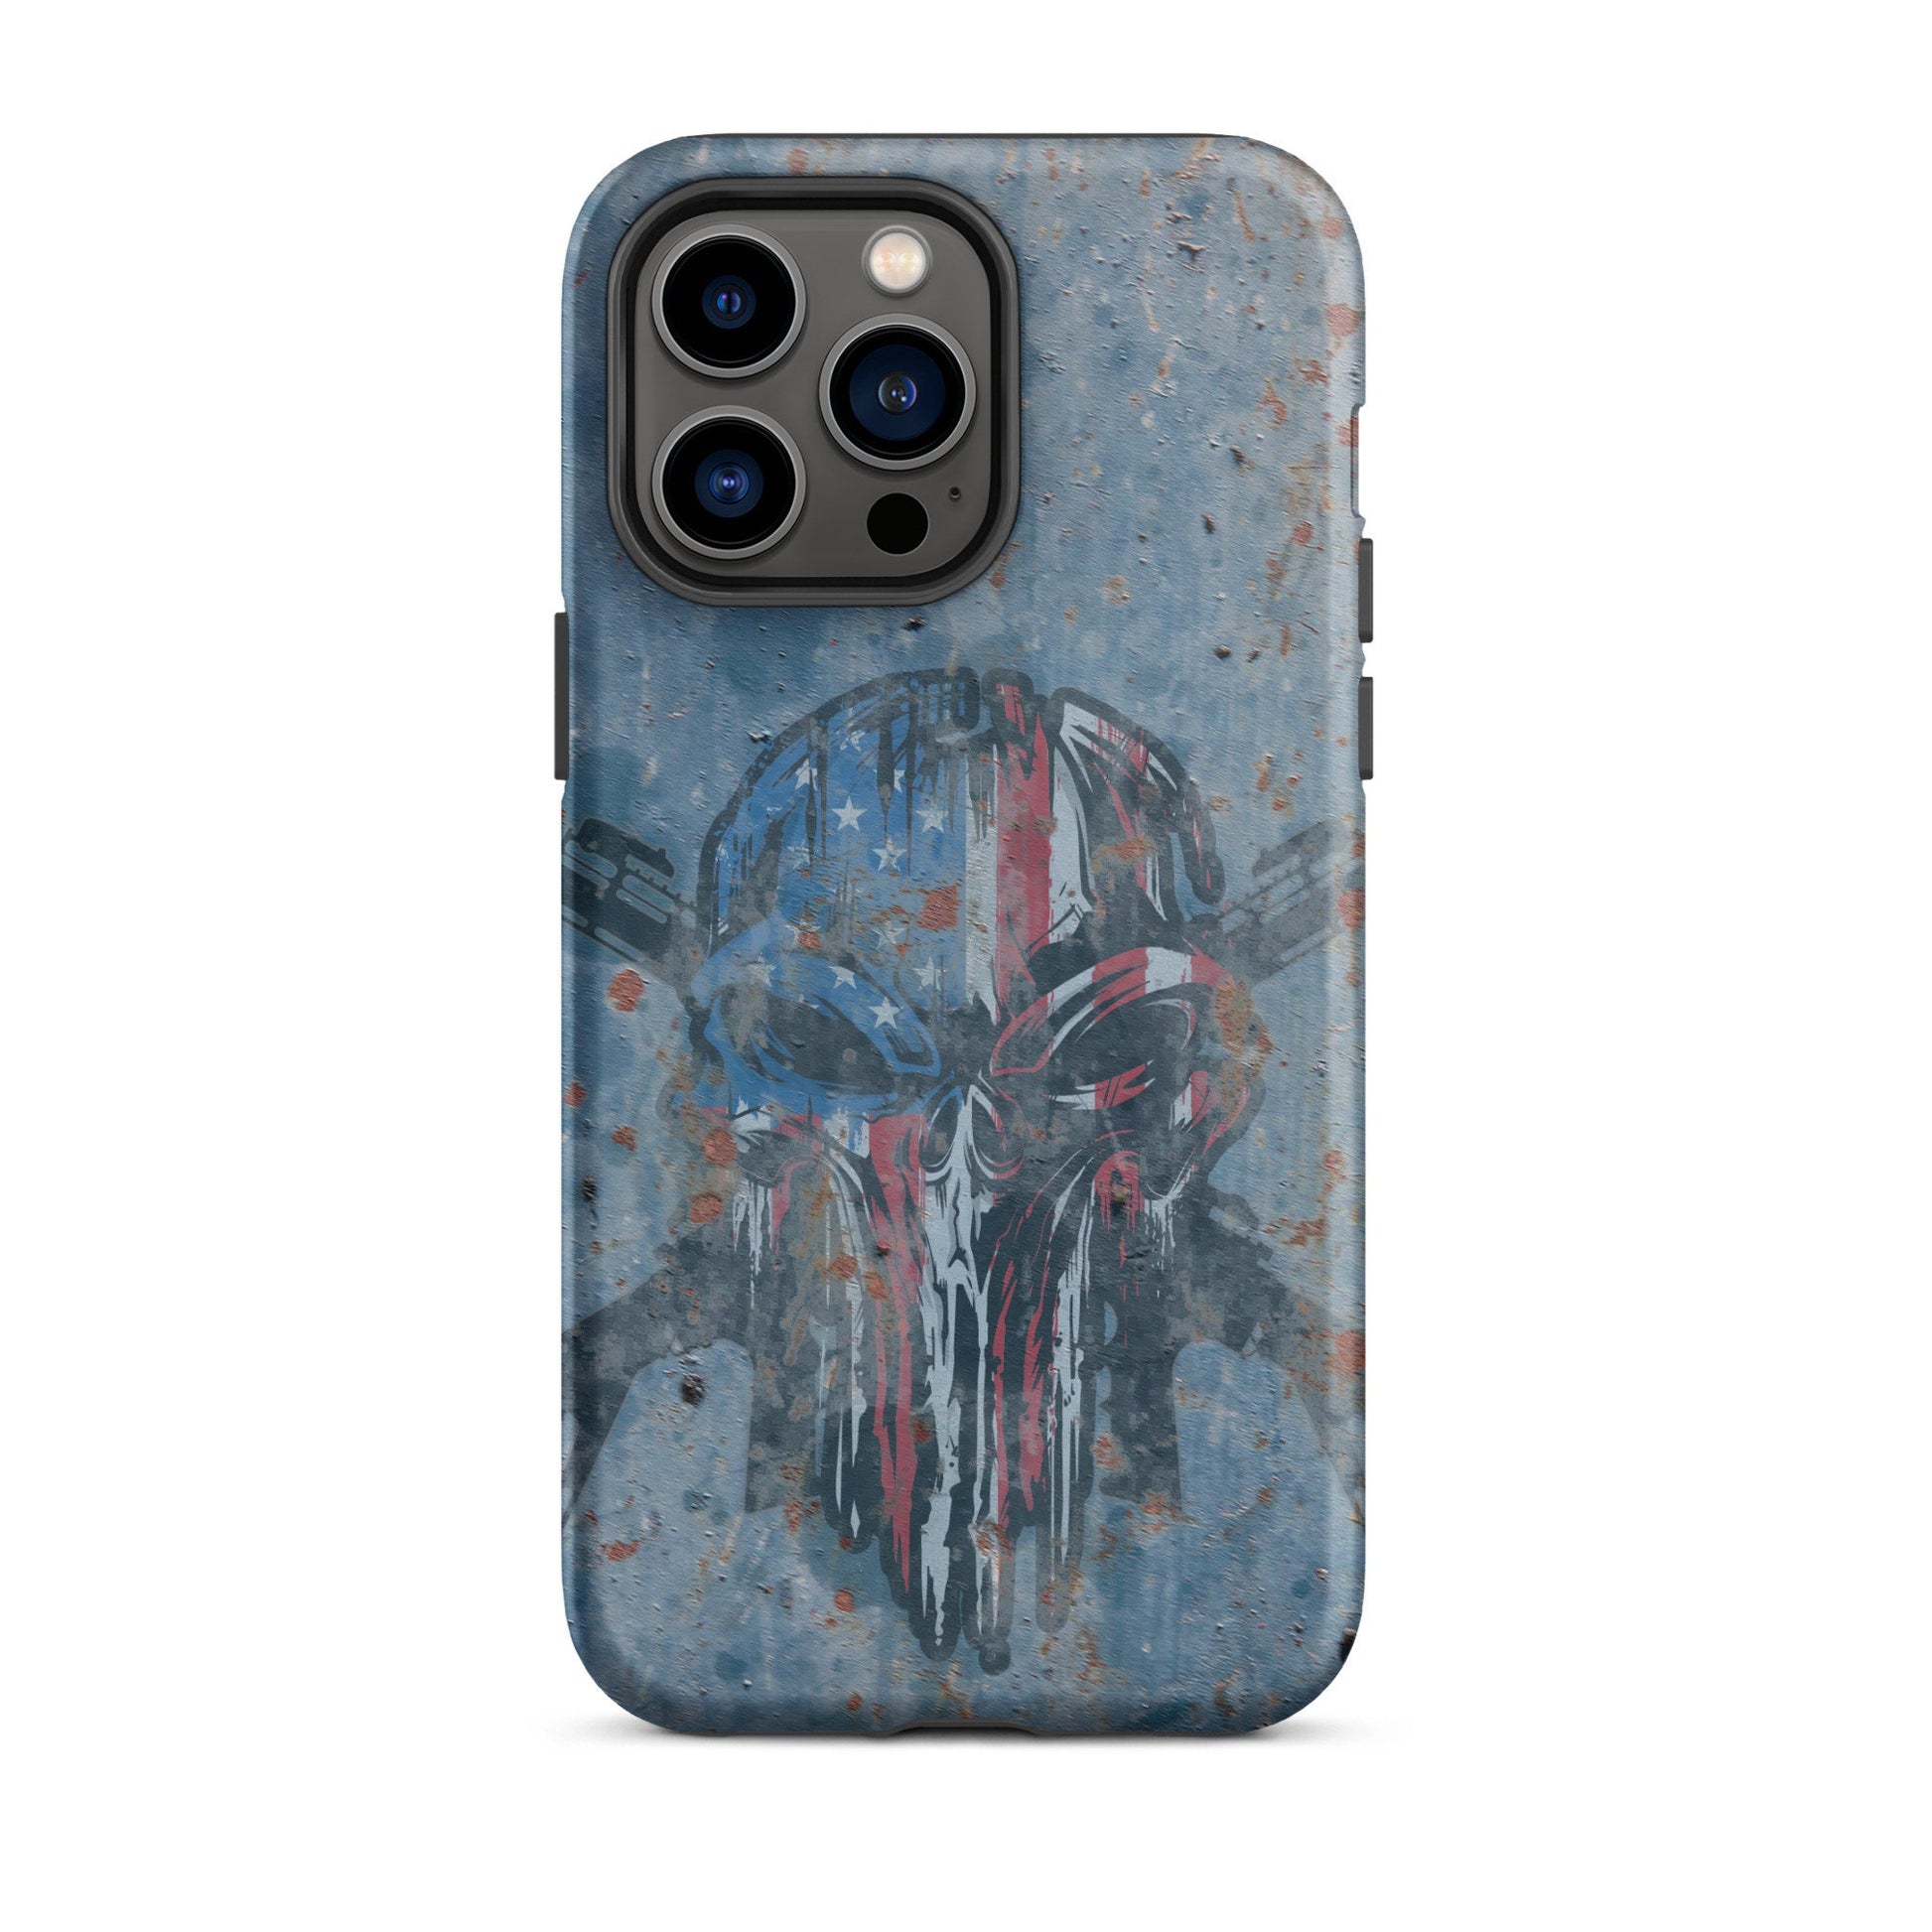 Punisher iPhone Case Vintage Distressed Rusted Phone Case Military and Outdoor Second Amendment Gun Owner Protective Case